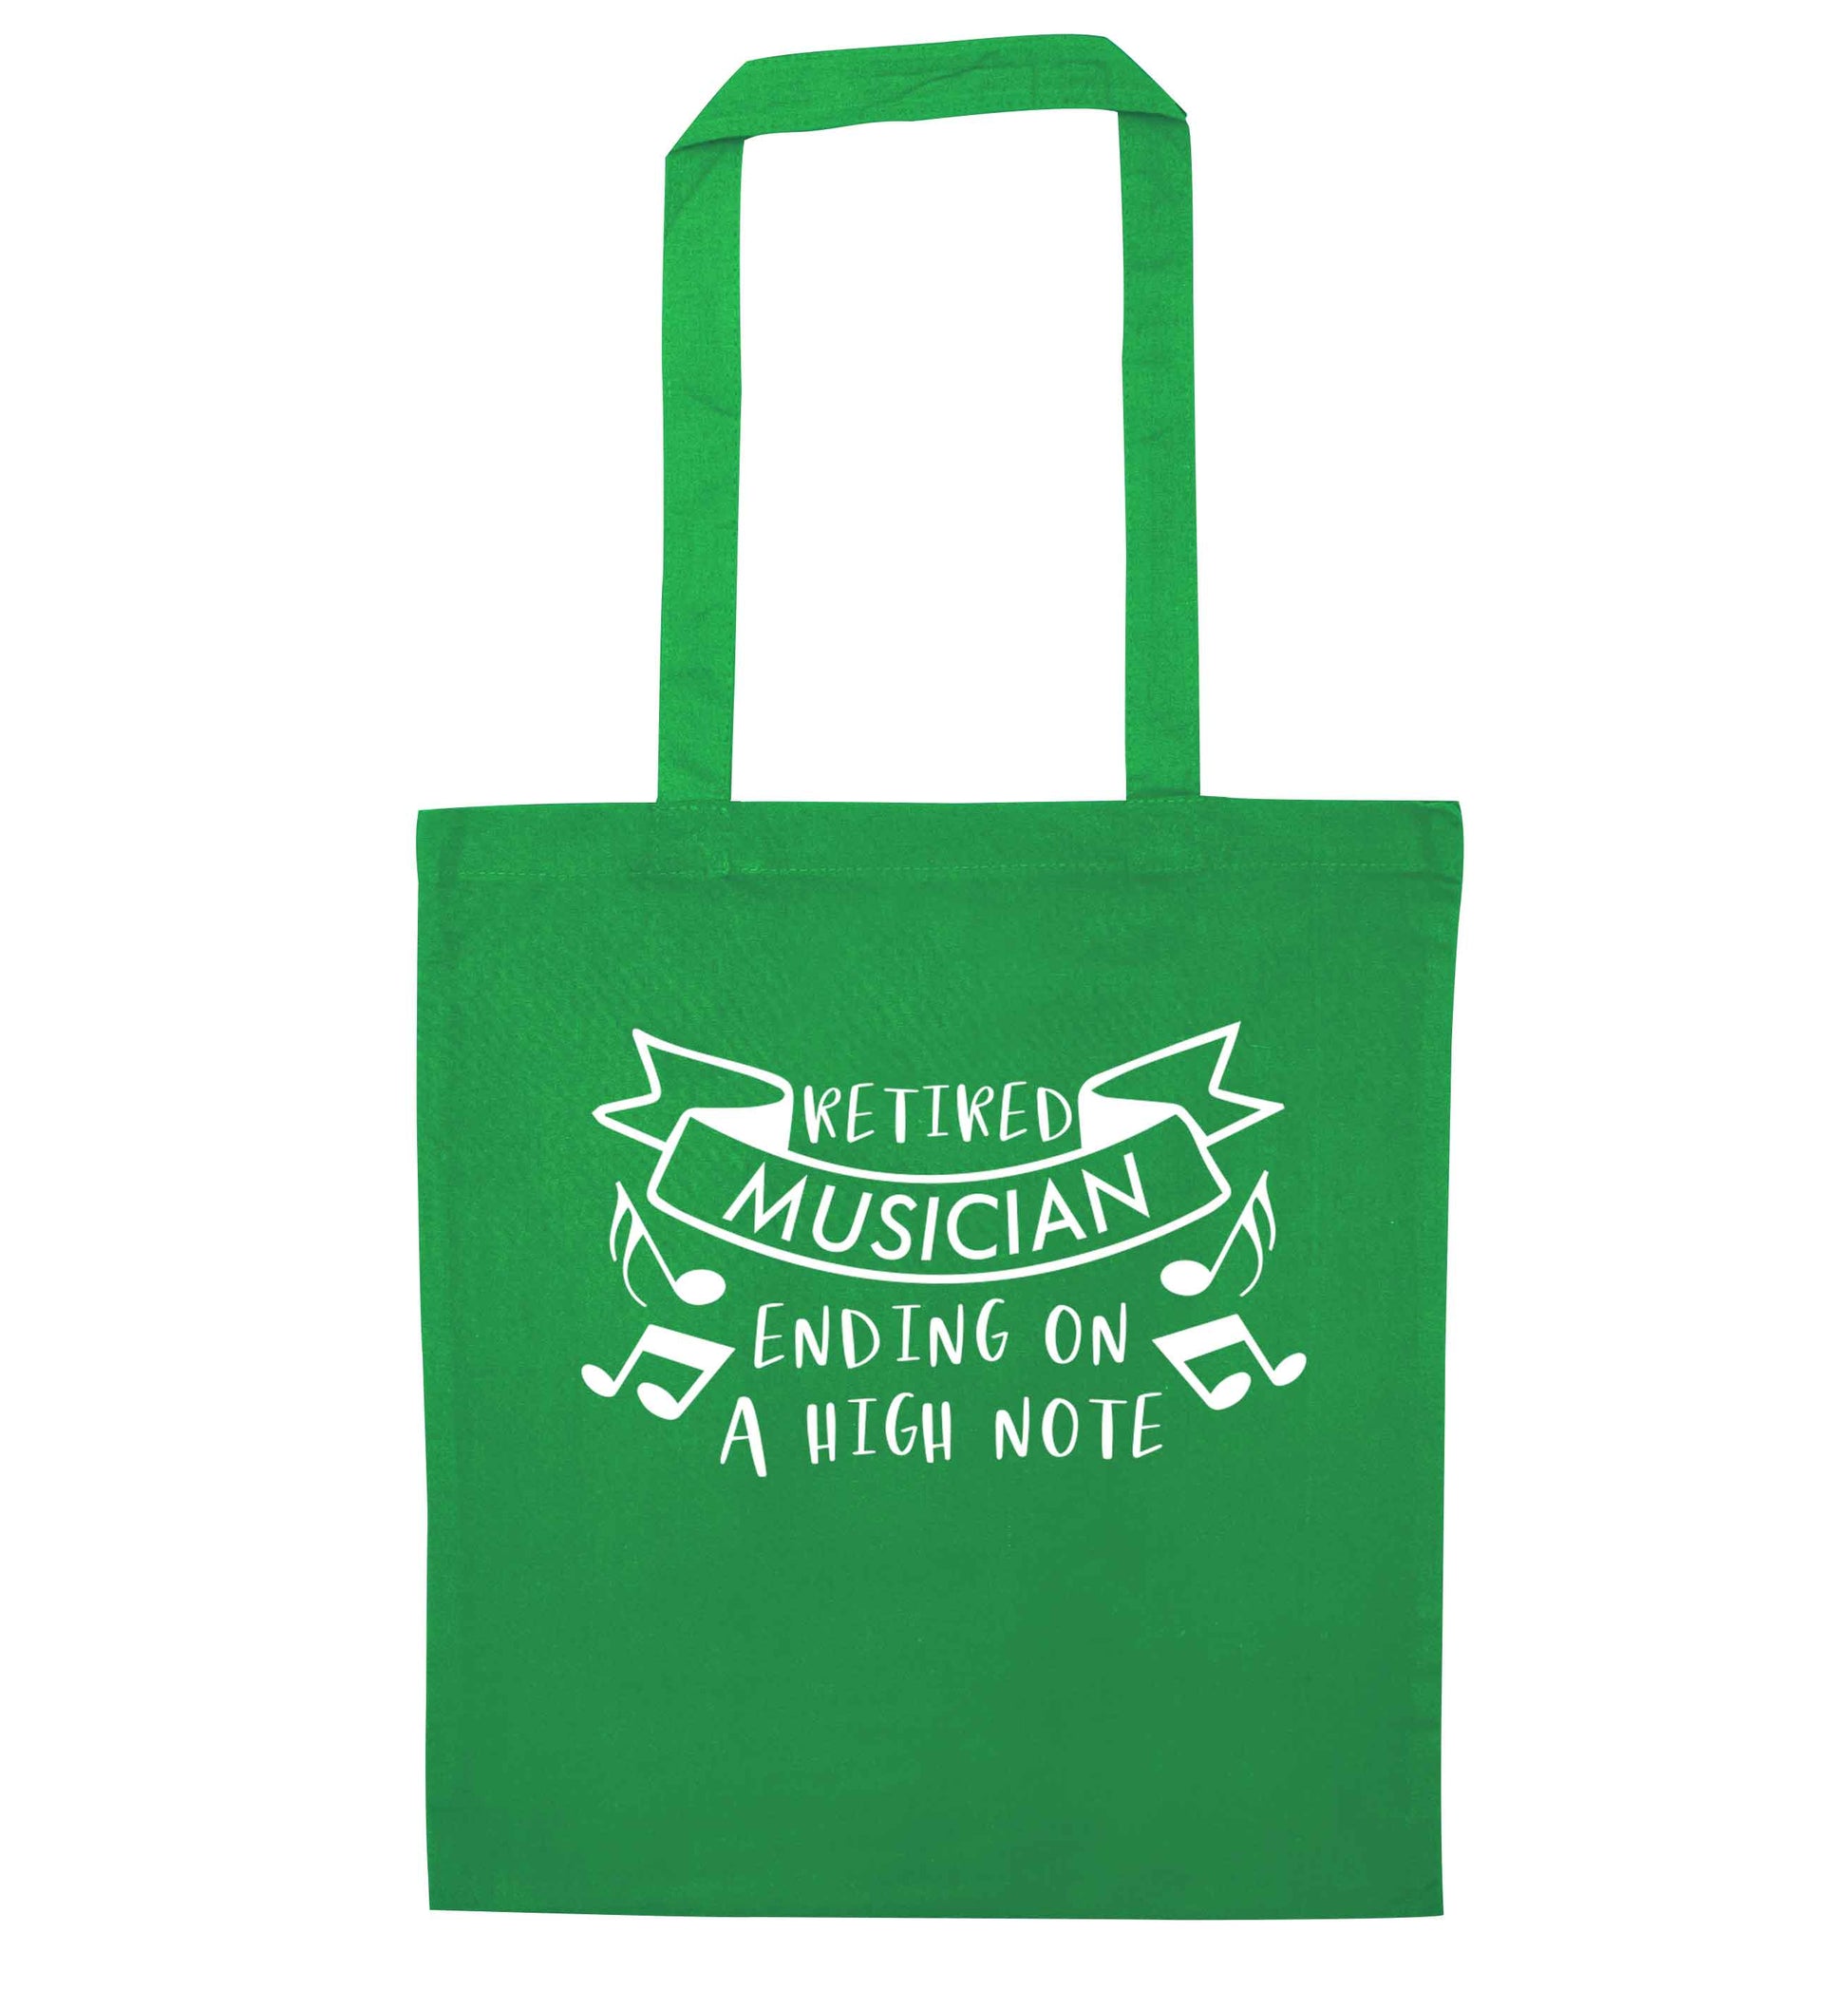 Retired musician ending on a high note green tote bag